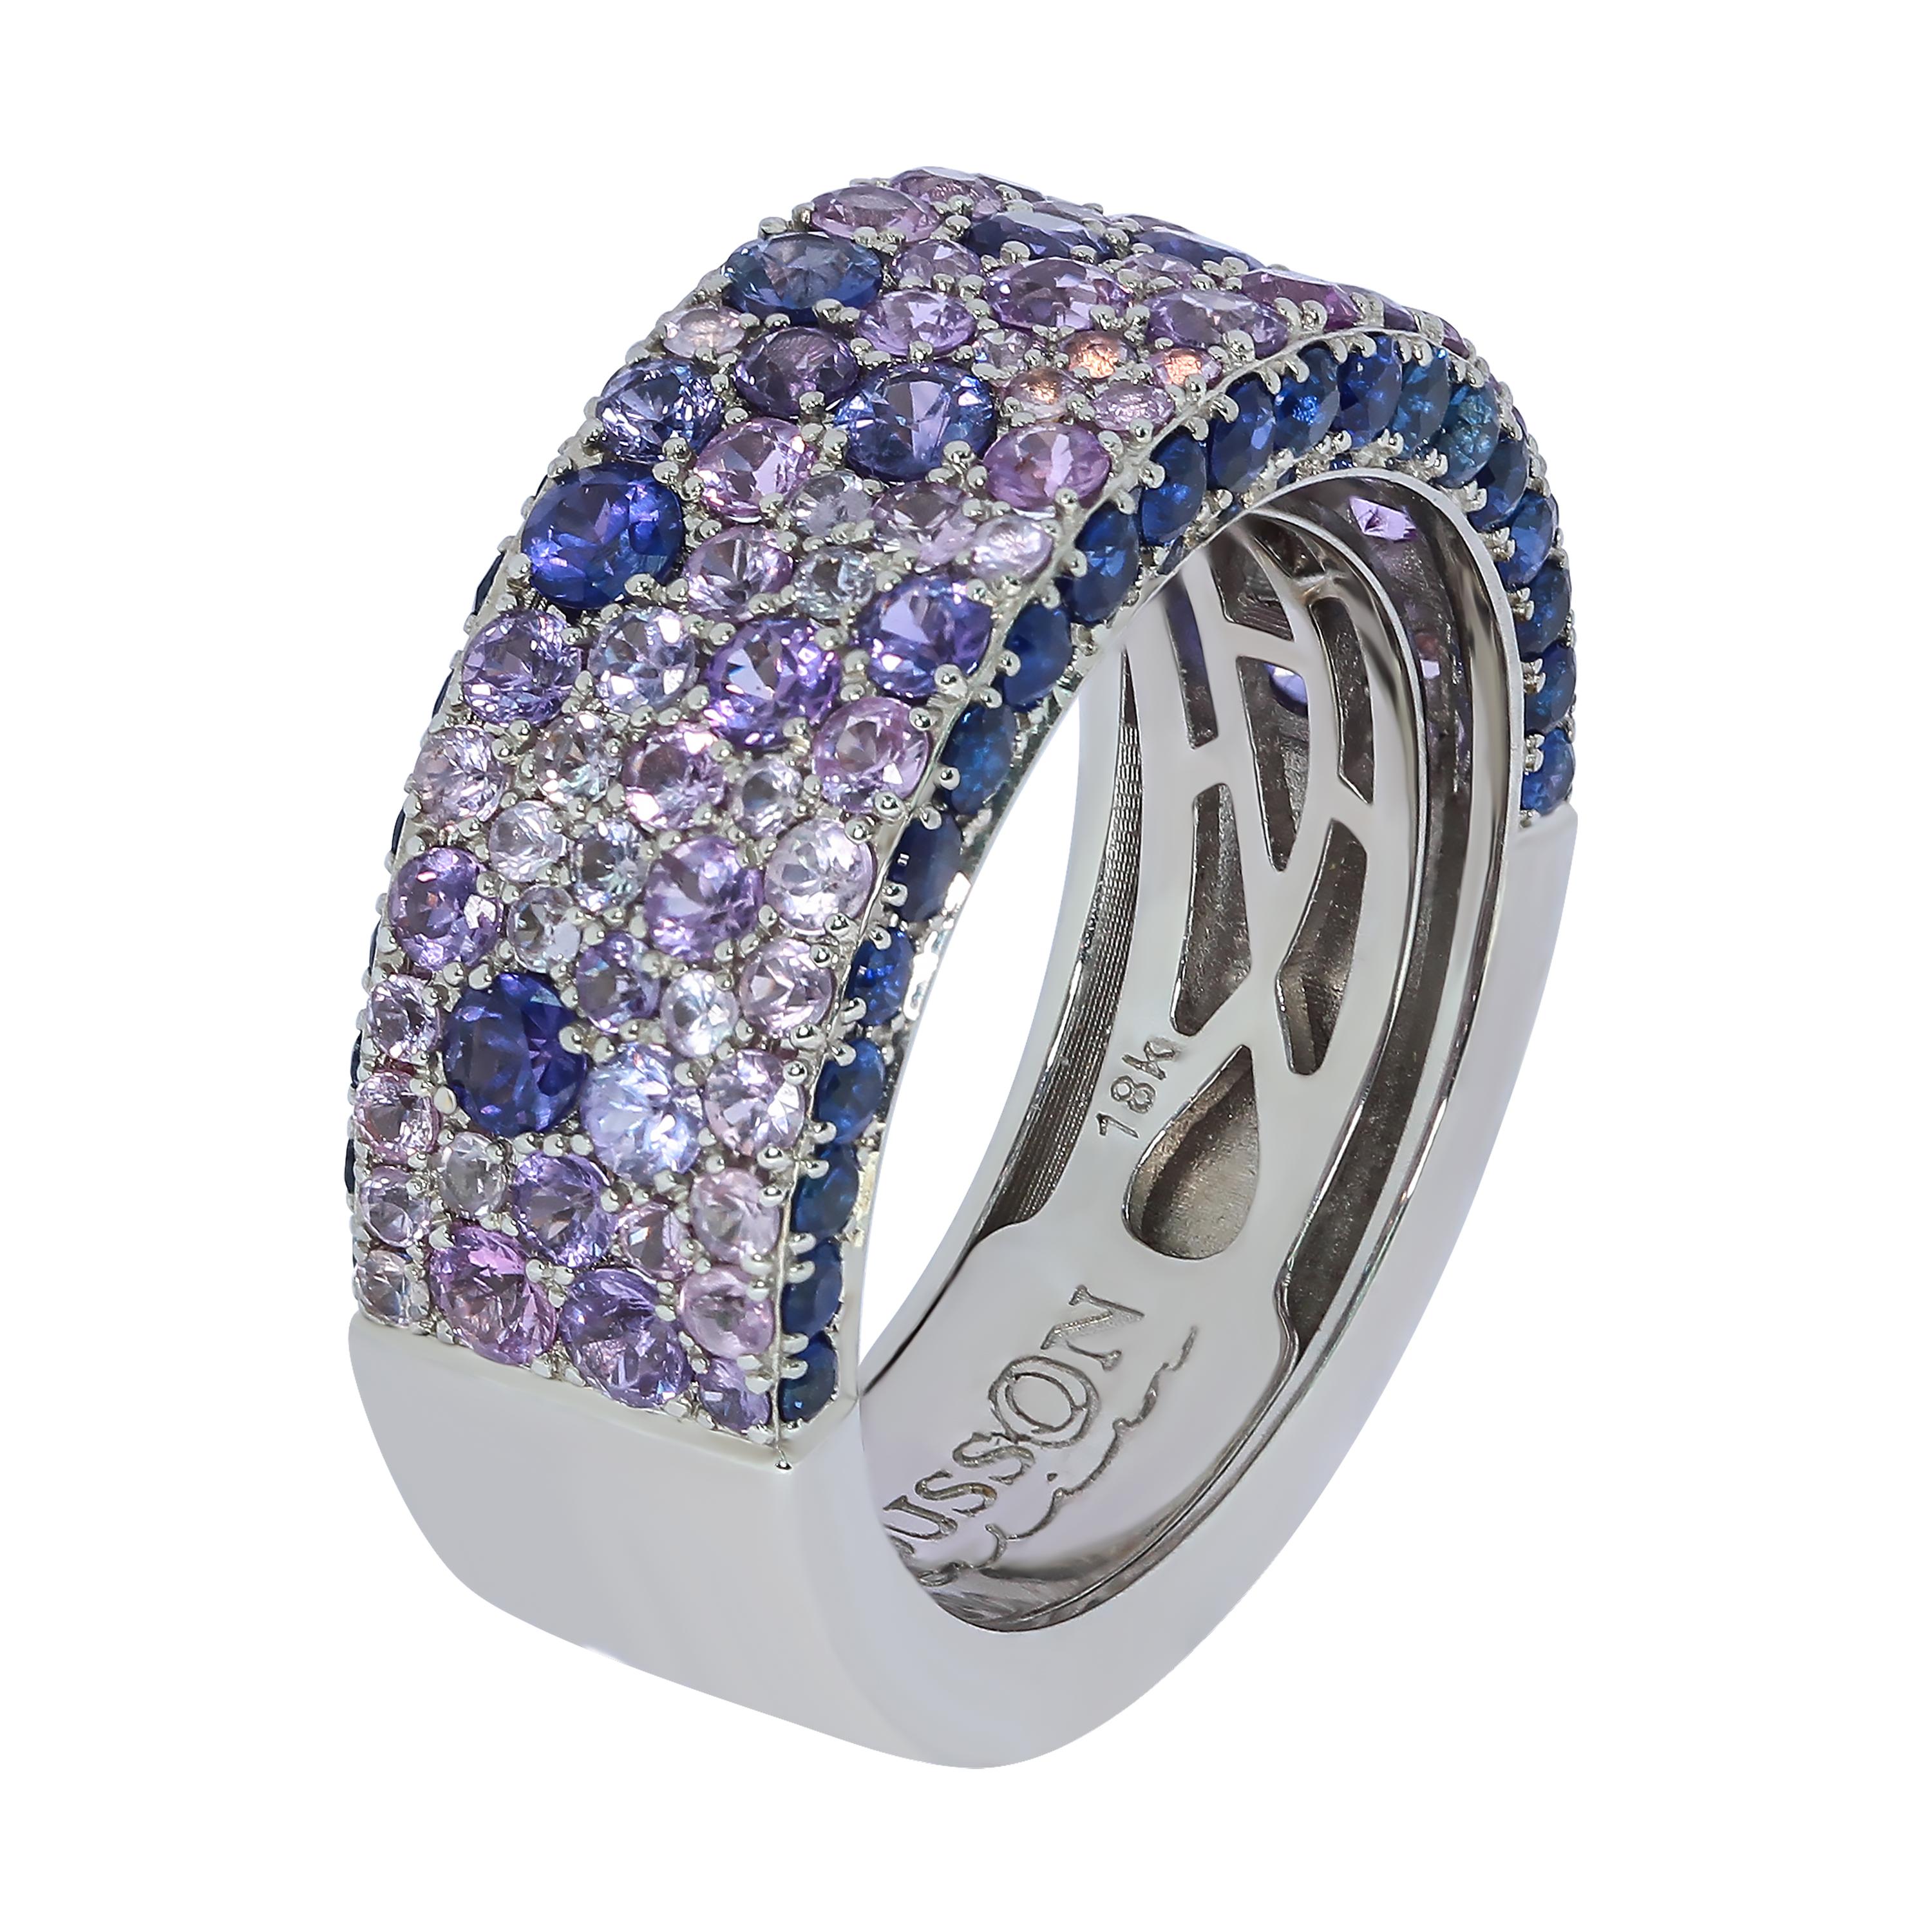 Blue Purple Sapphires 18 Karat White Gold Riviera Ring
Imagine a warm summer evening, seashore, unobtrusive music, small talks, sparkling wine. It is at such cocktail parties that the jewelry from our Riviera Collection will be in the center of